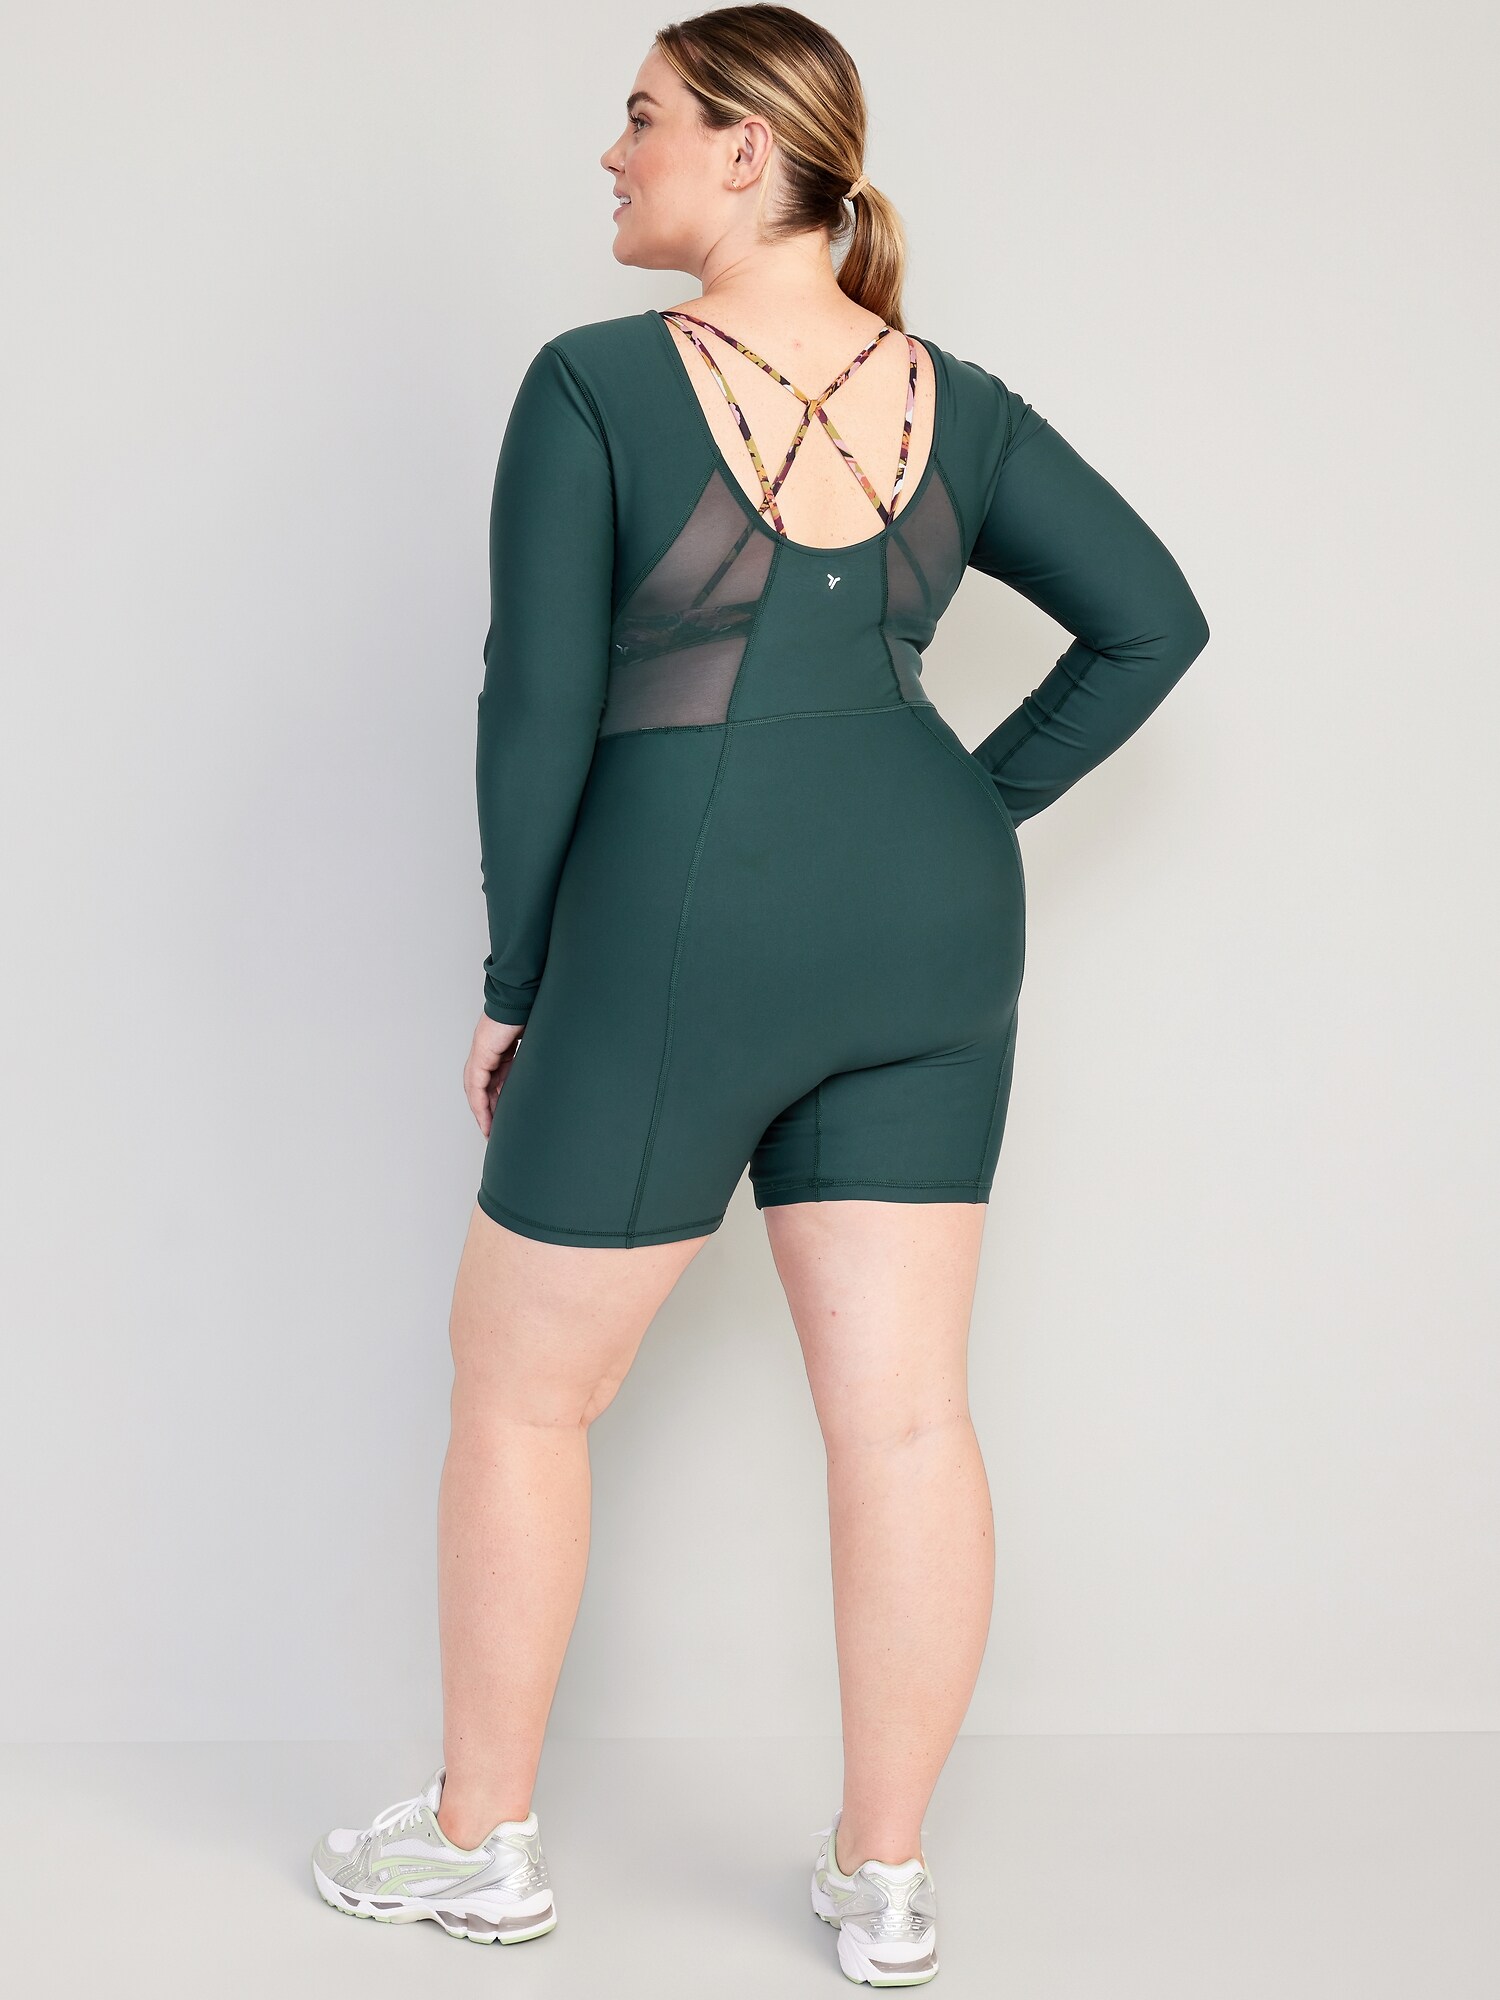 Old Navy PowerSoft Body Suits! : r/PetiteFashionAdvice